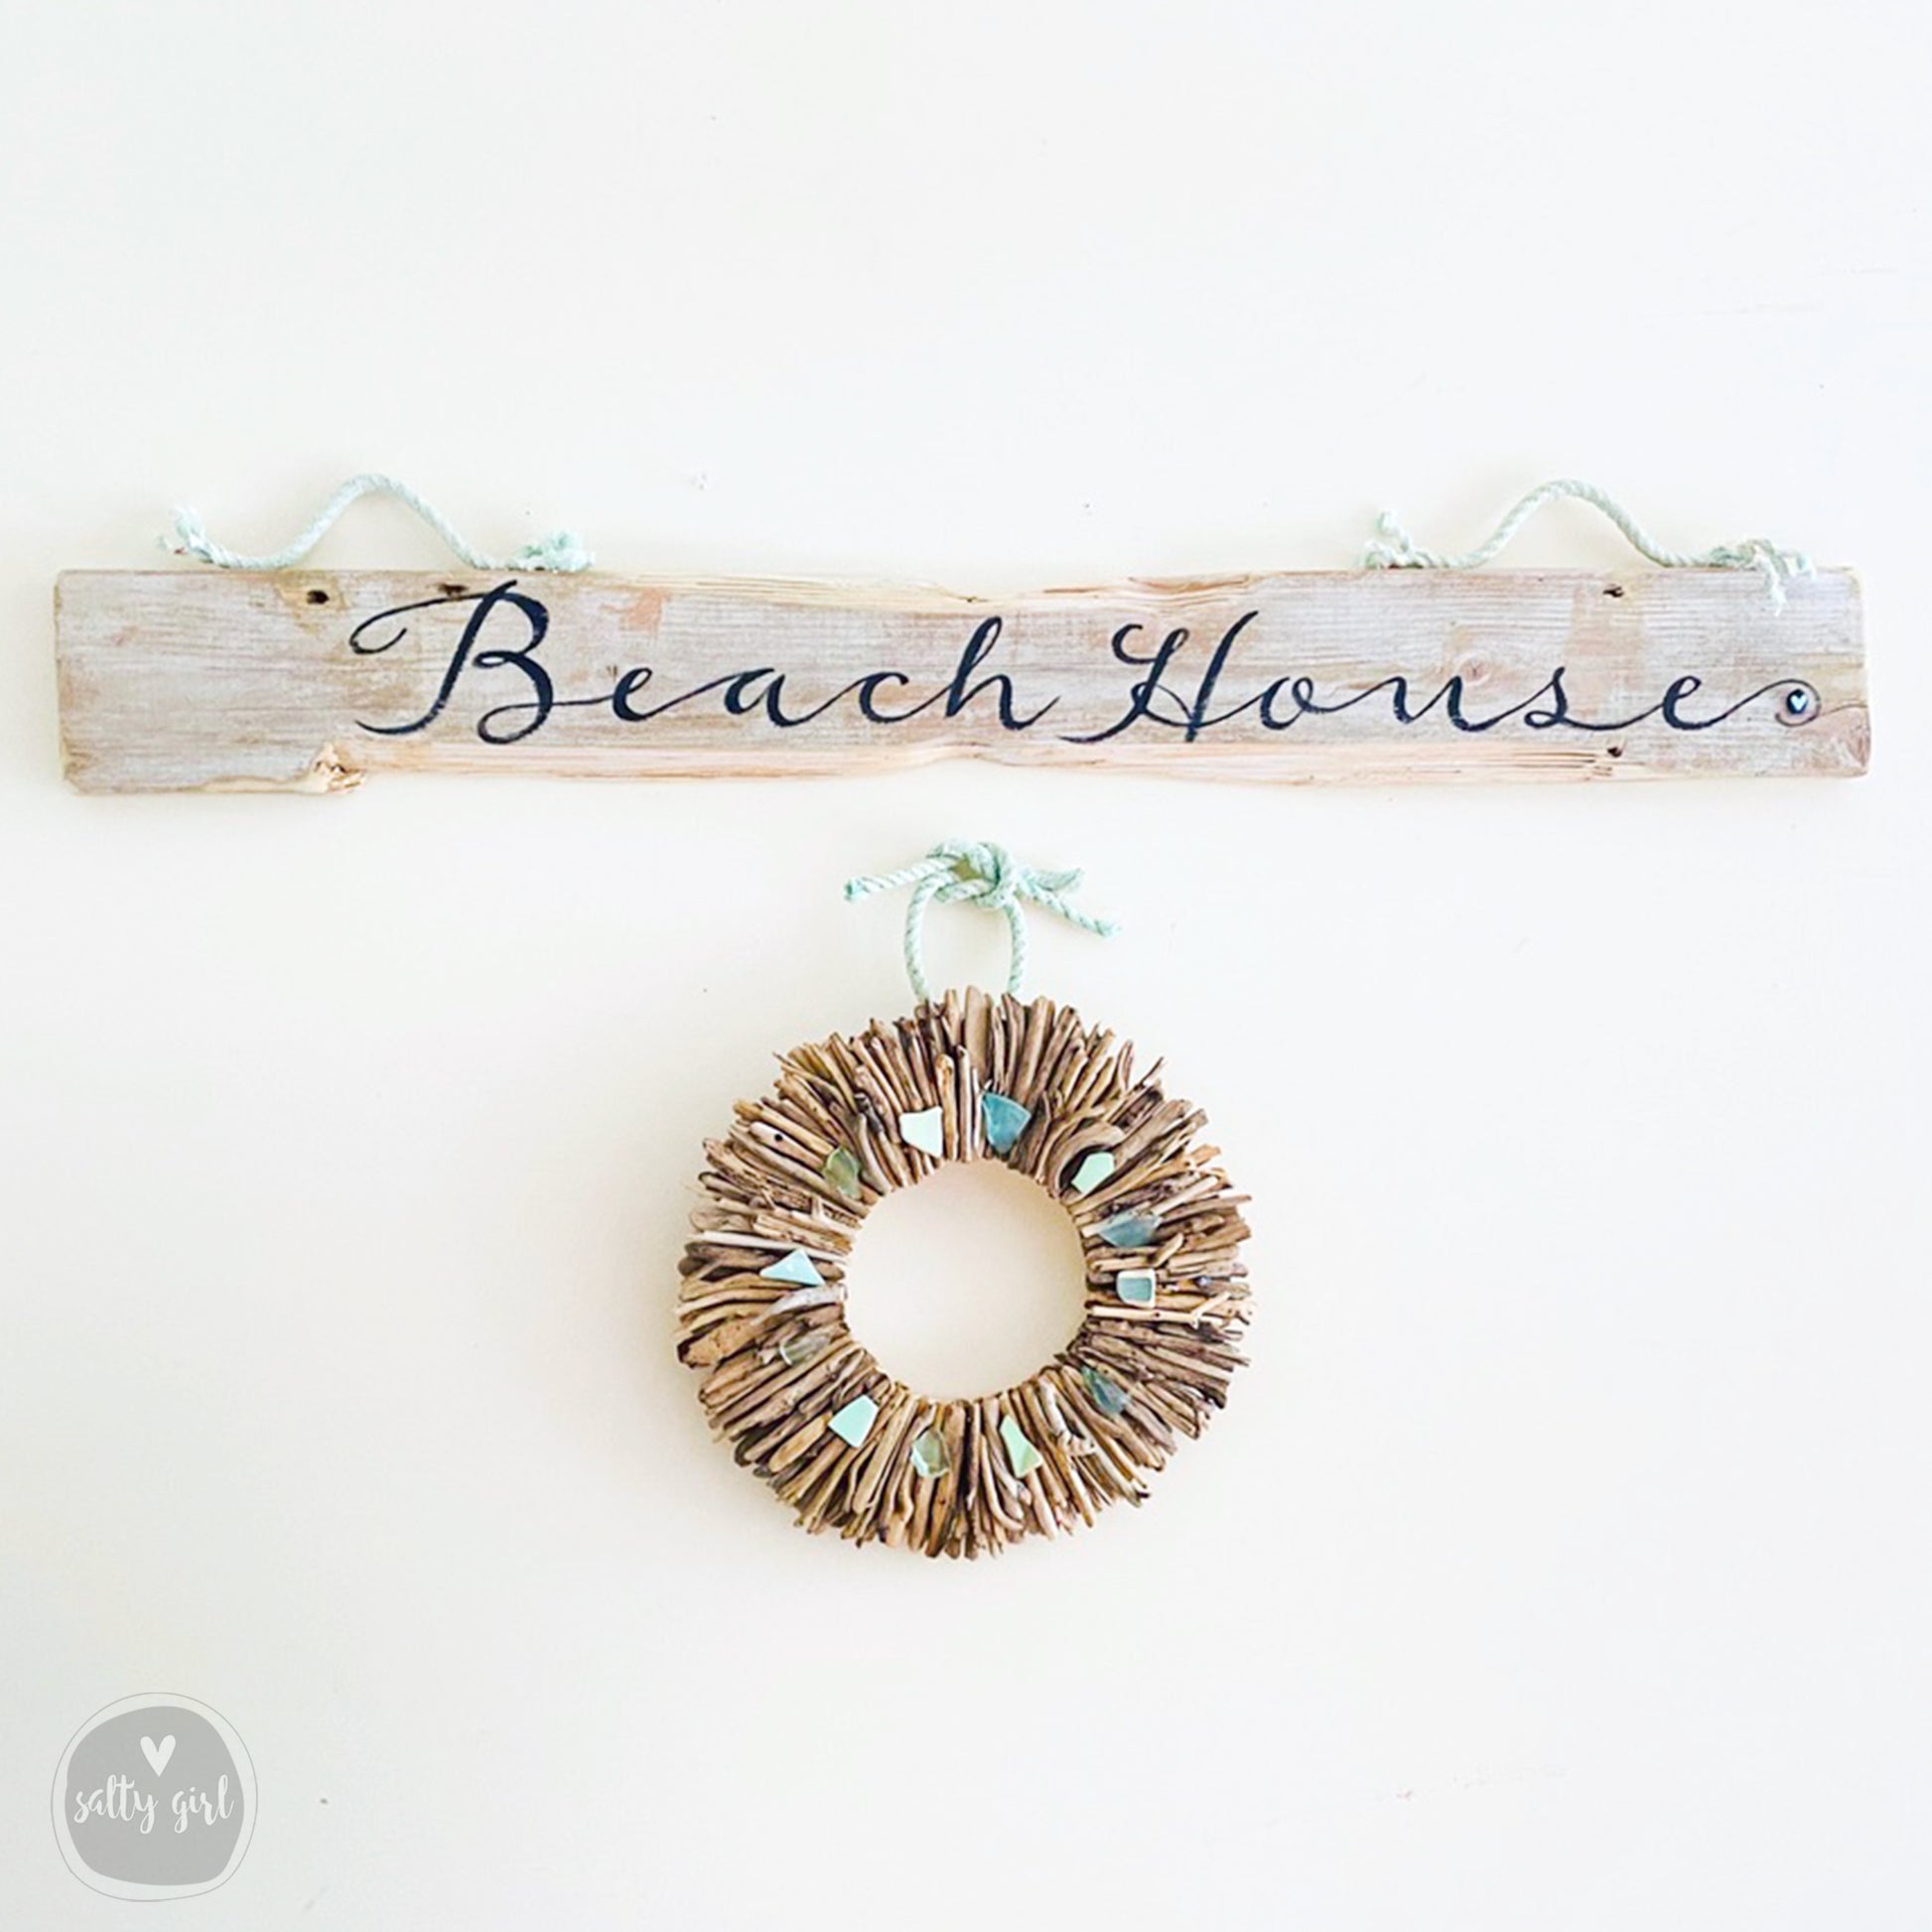 a wooden sign that says beach house with a wreath hanging from it